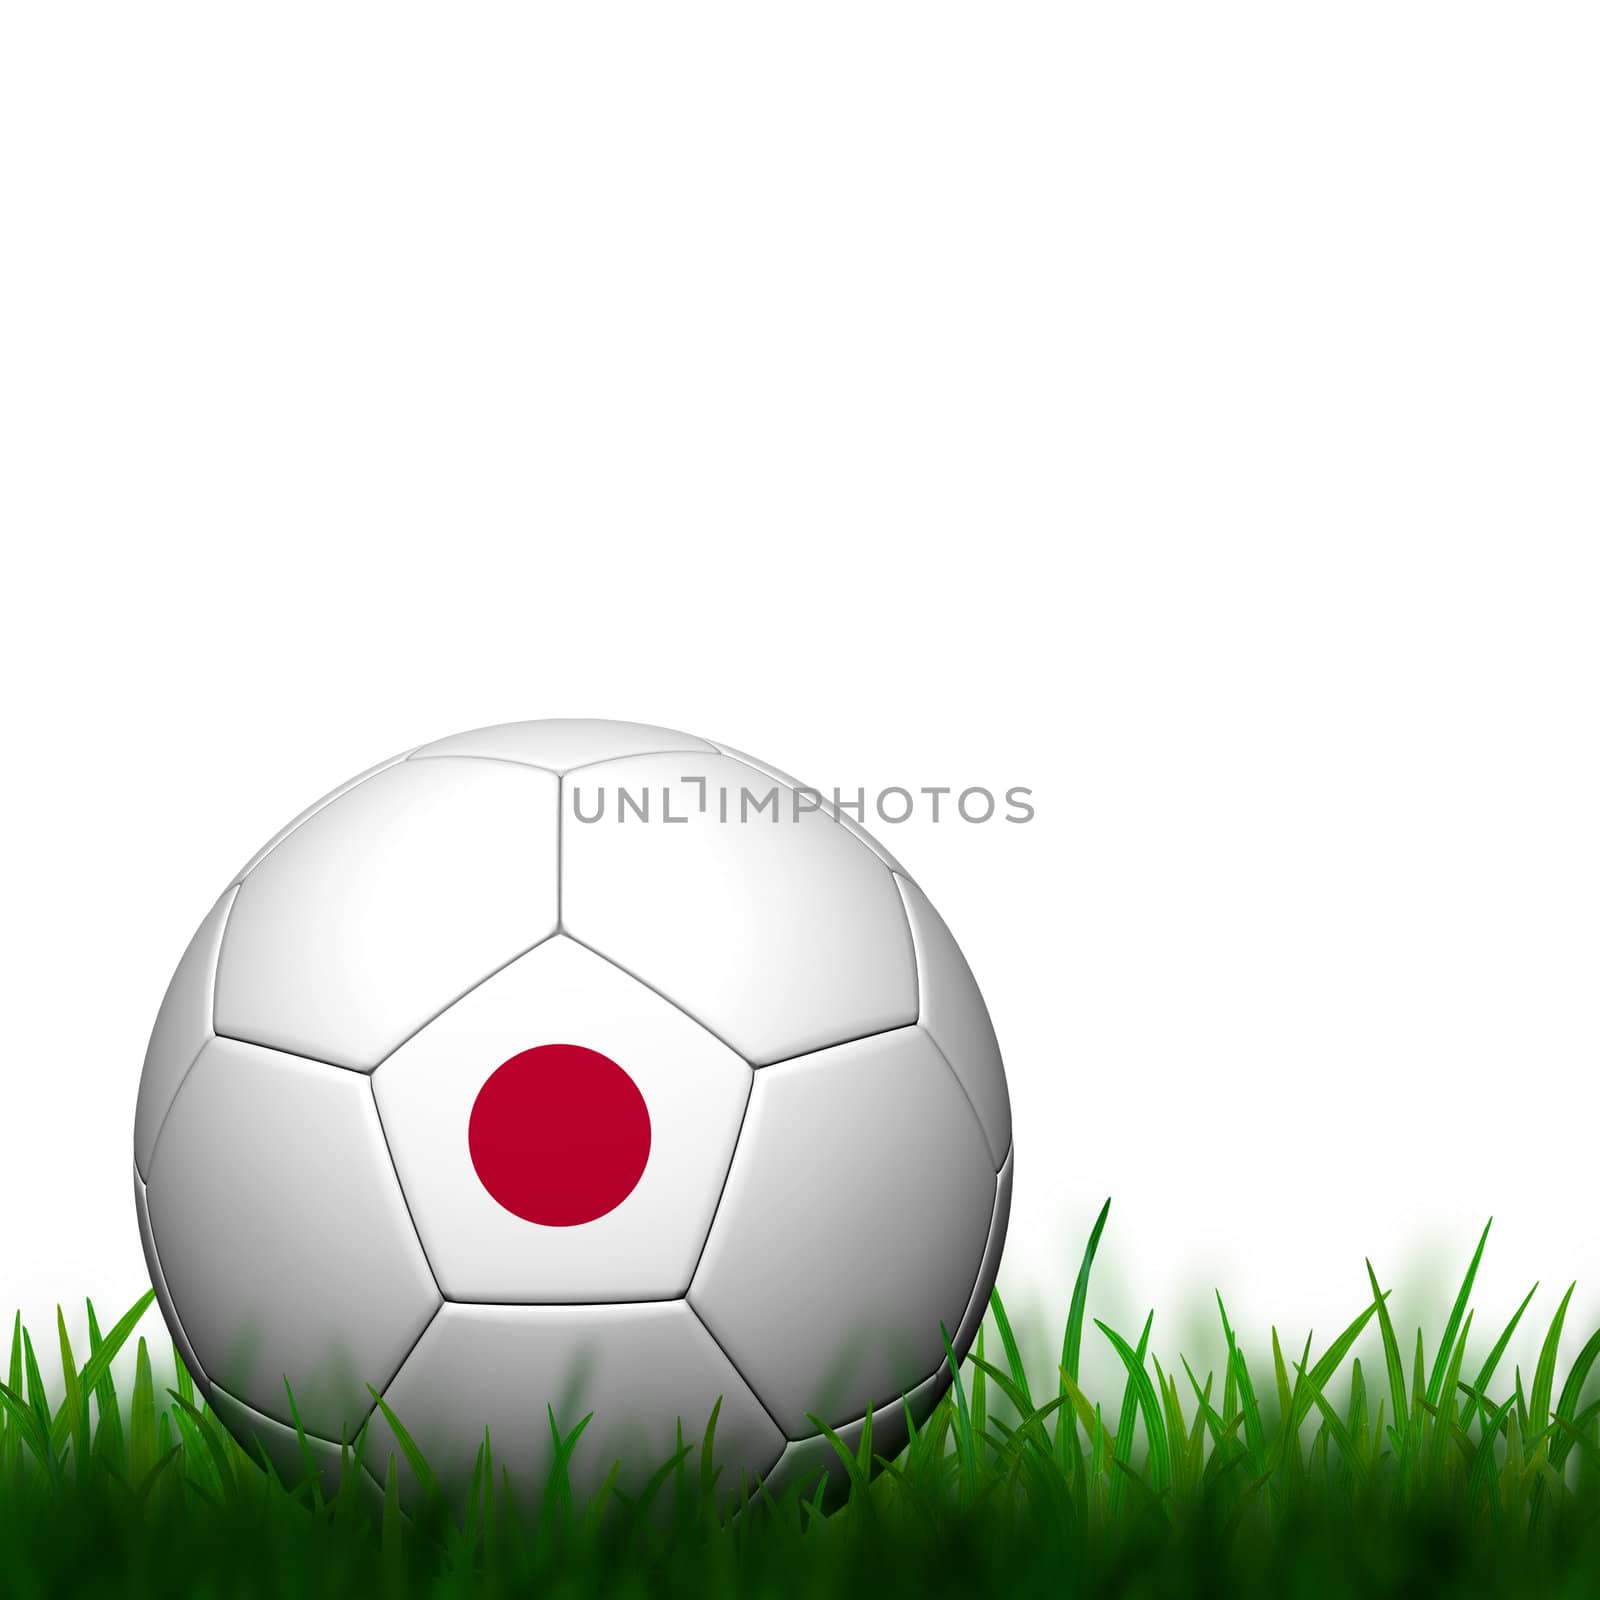 3D Football Japan Flag Patter in green grass on white background